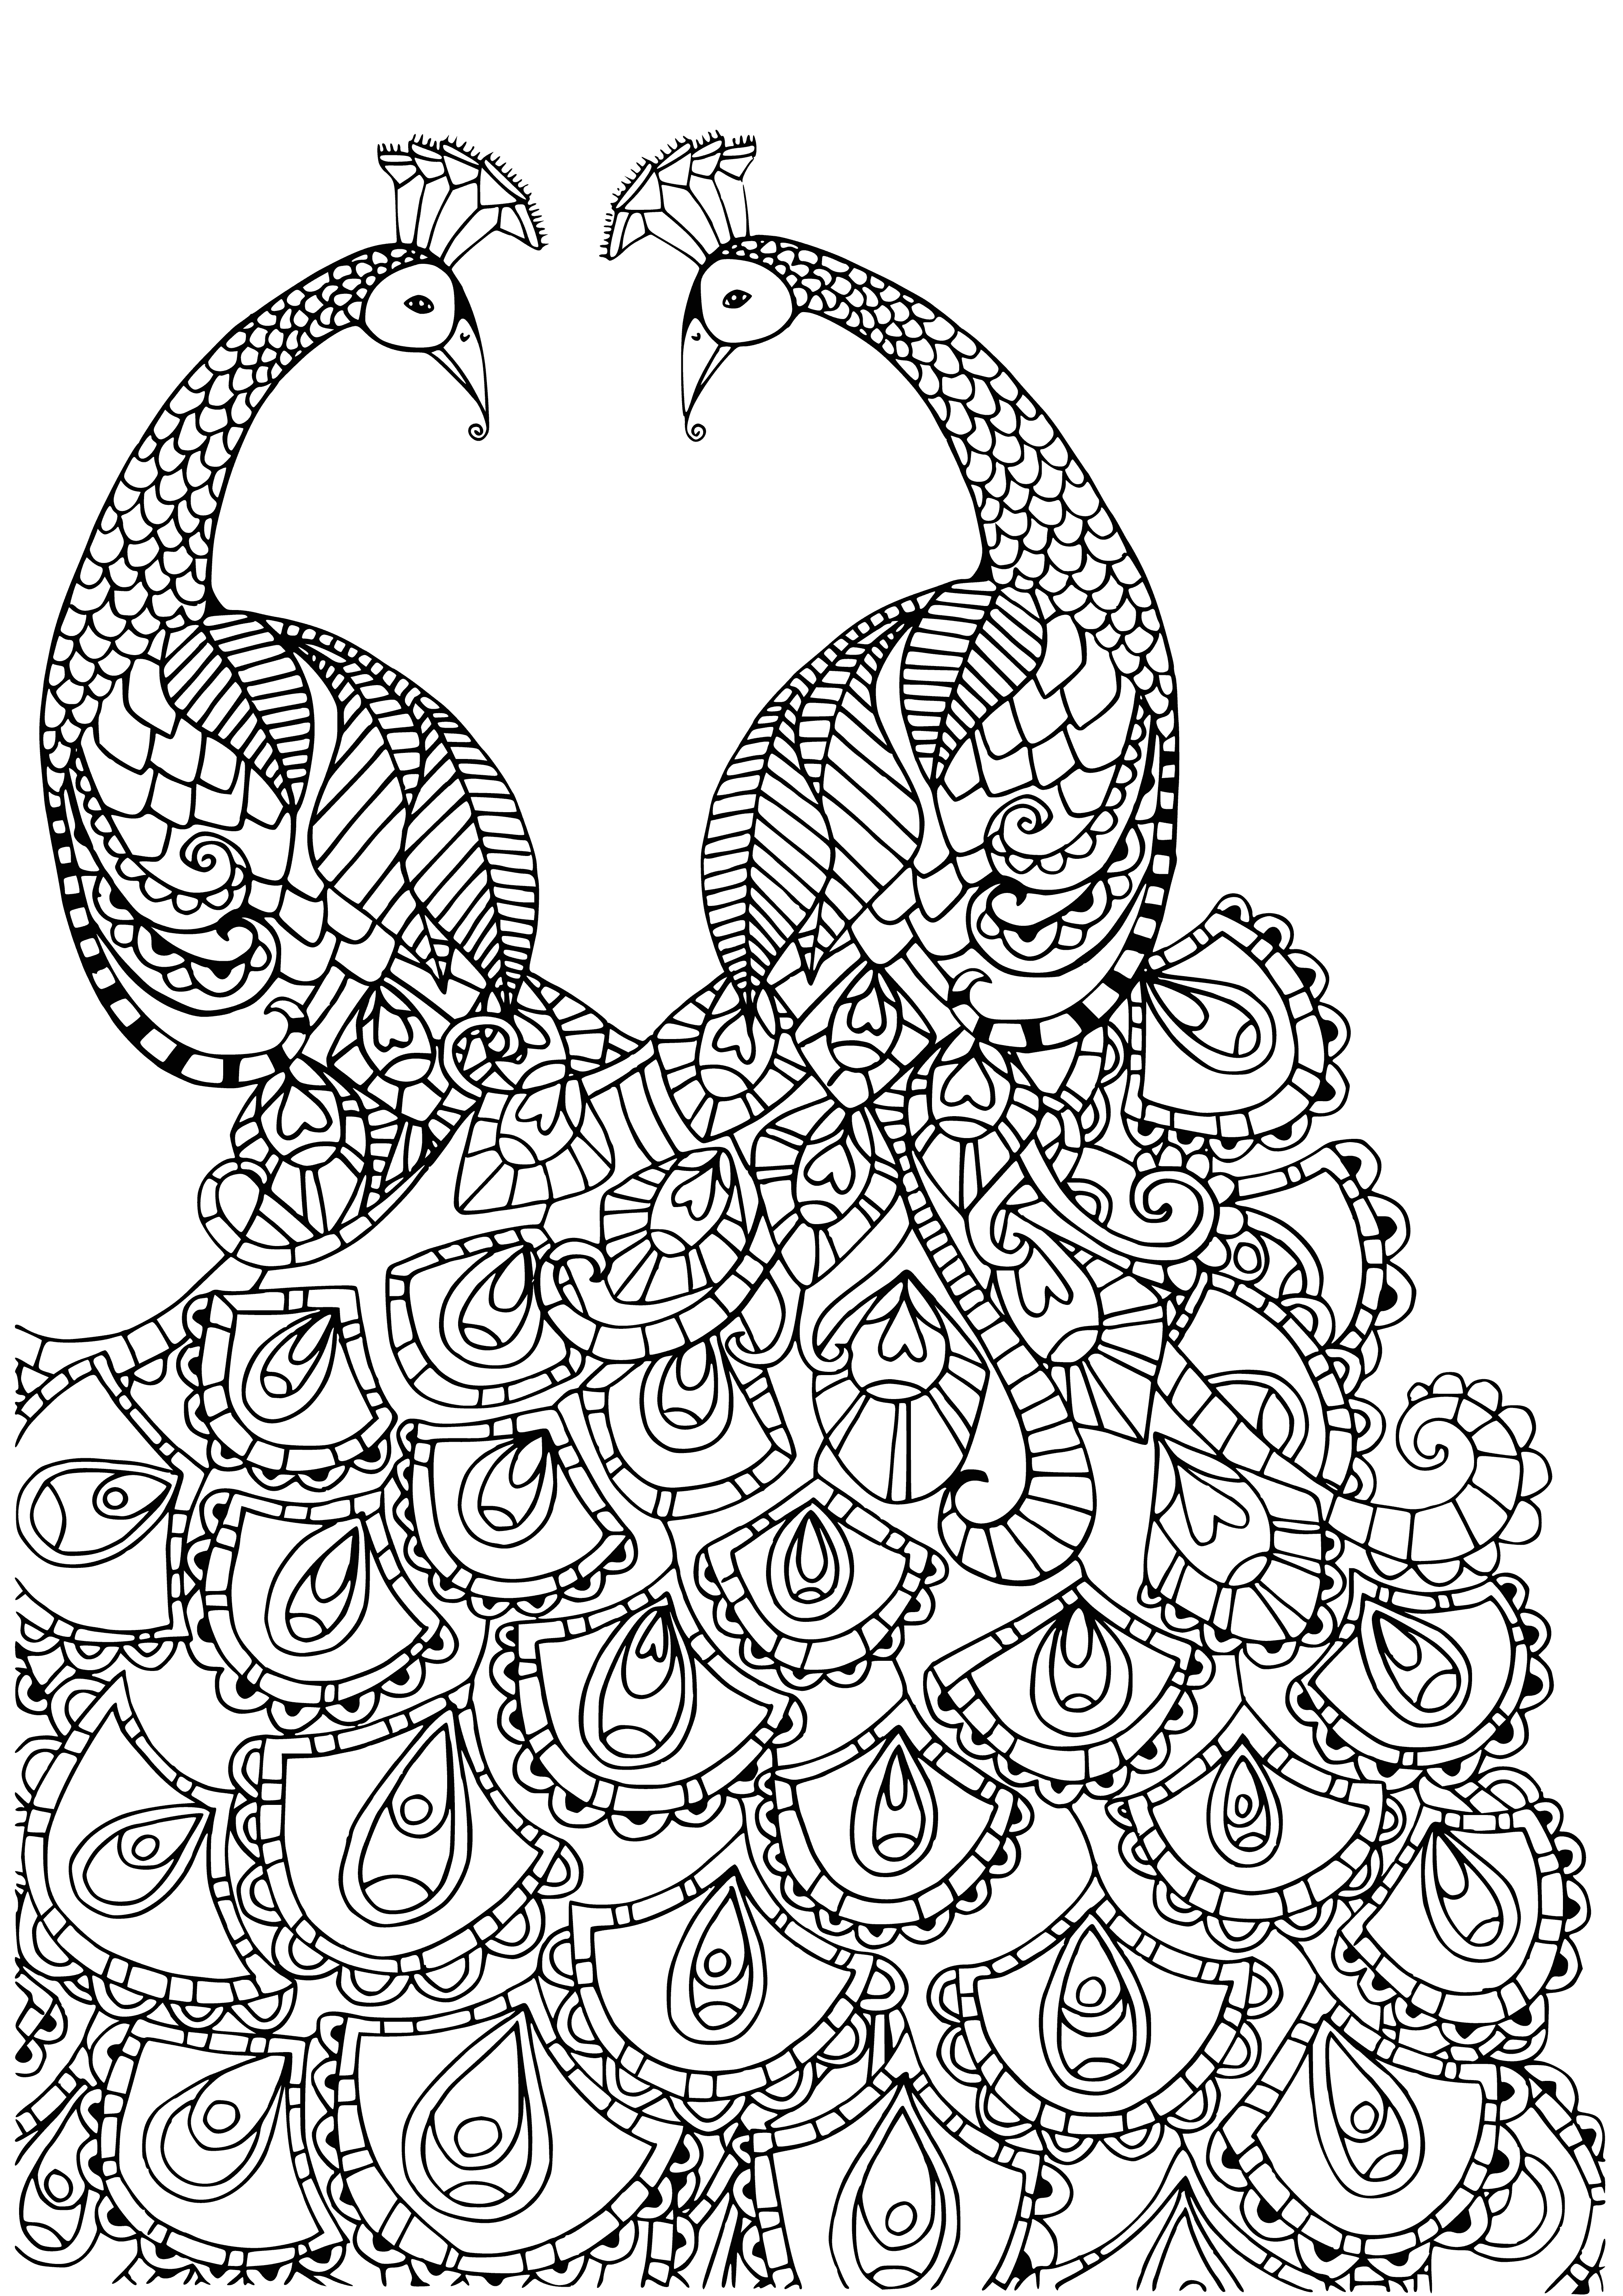 coloring page: Proud peacocks show off their long, colorful tails and enjoy the attention they get.